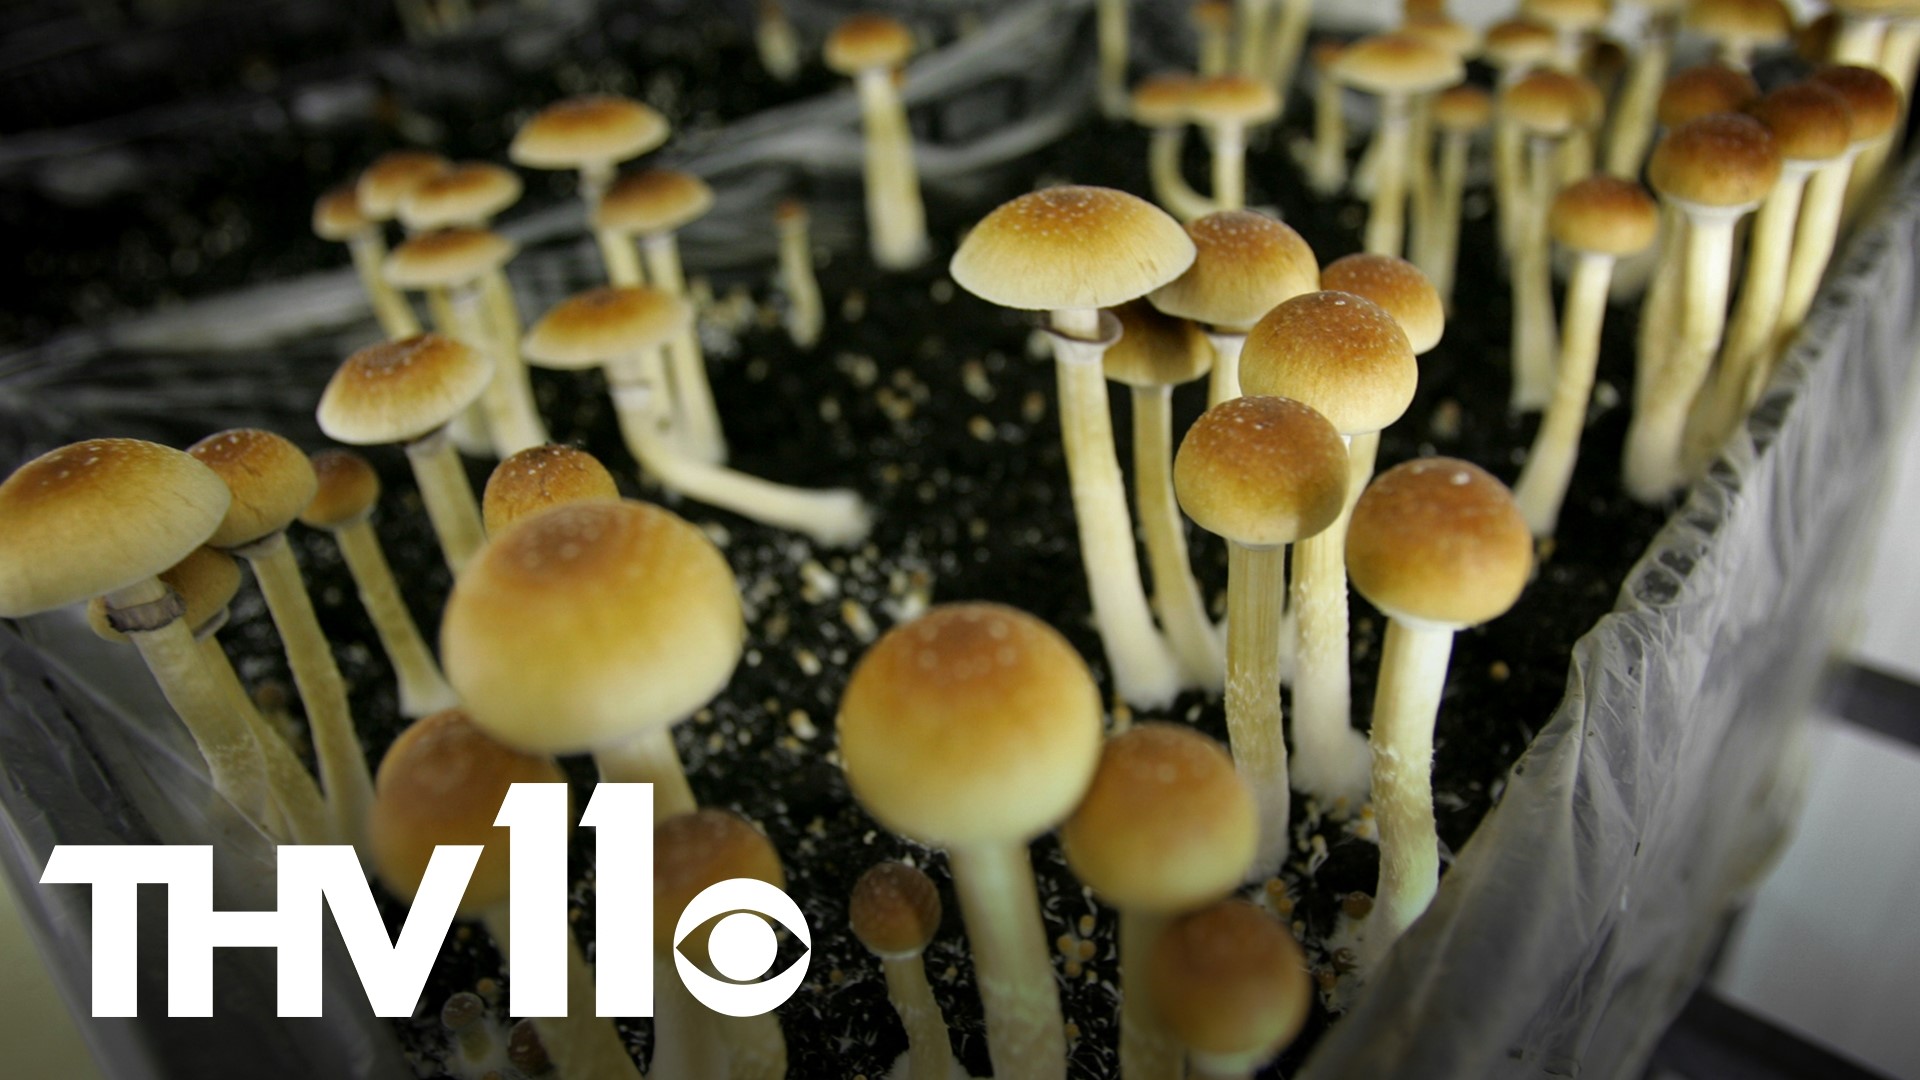 Therapists in Arkansas are looking into the use of psychedelics, like mushrooms and MDMA, to treat mental ailments.